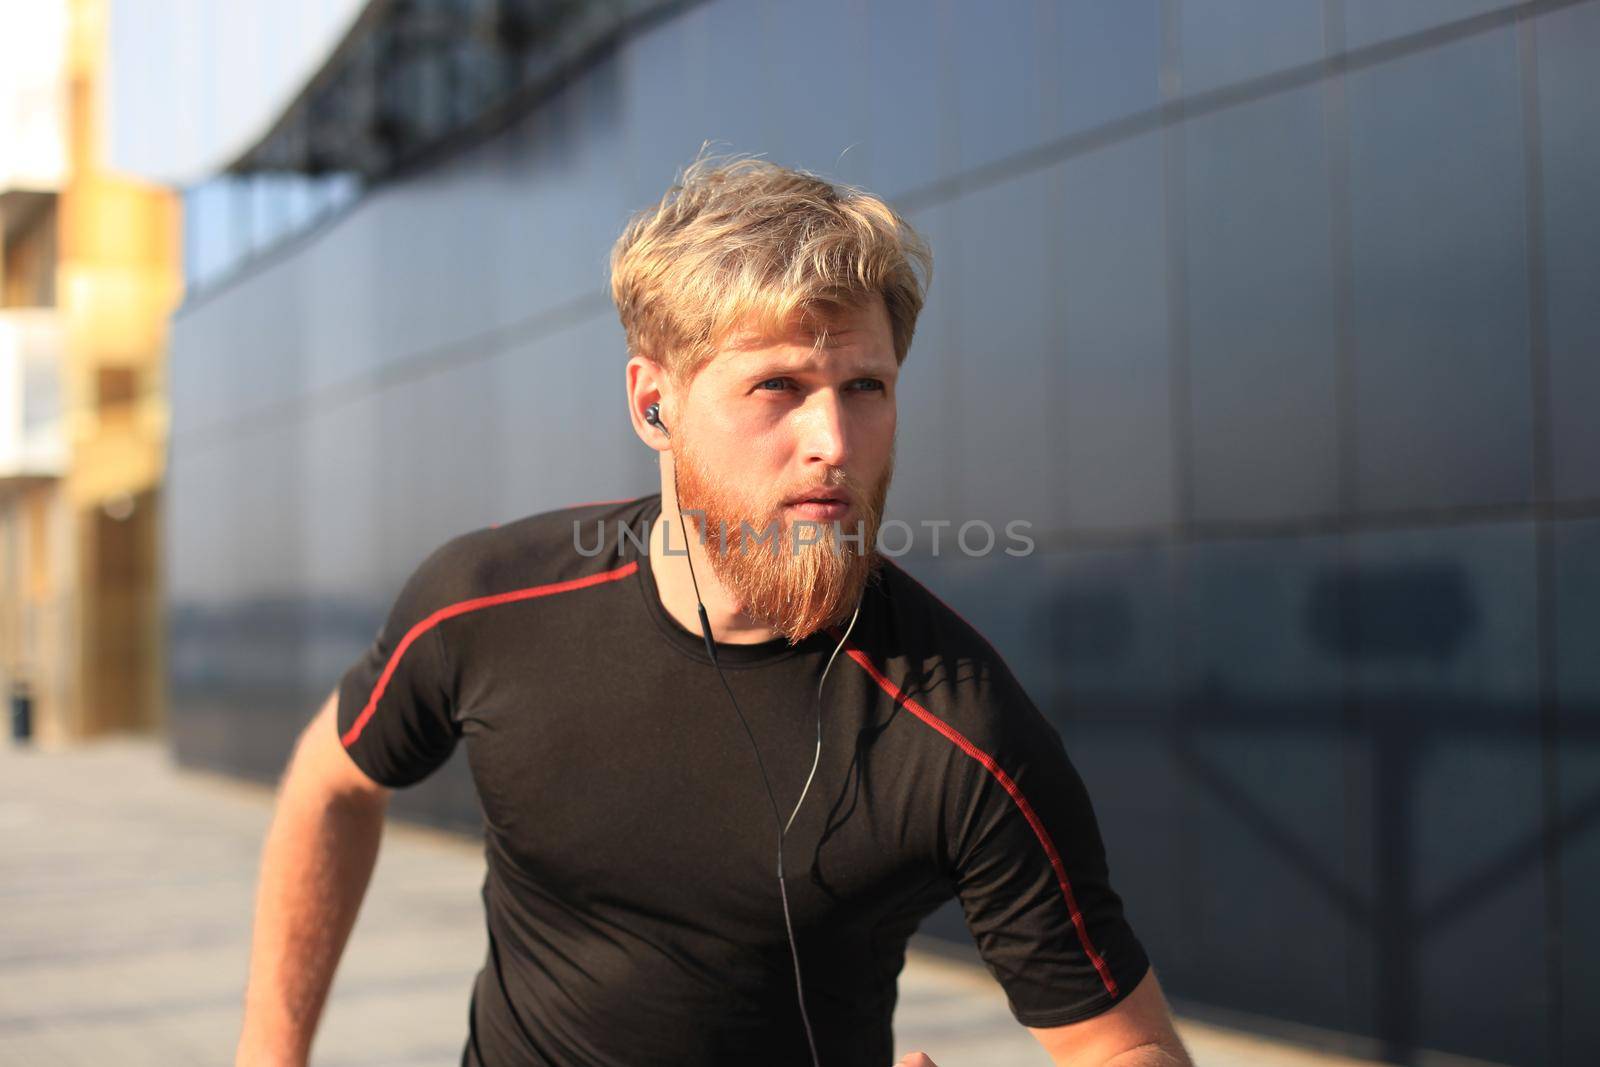 Fit athlete. Handsome adult man running outdoors to stay healthy, at sunset or sunrise. Runner